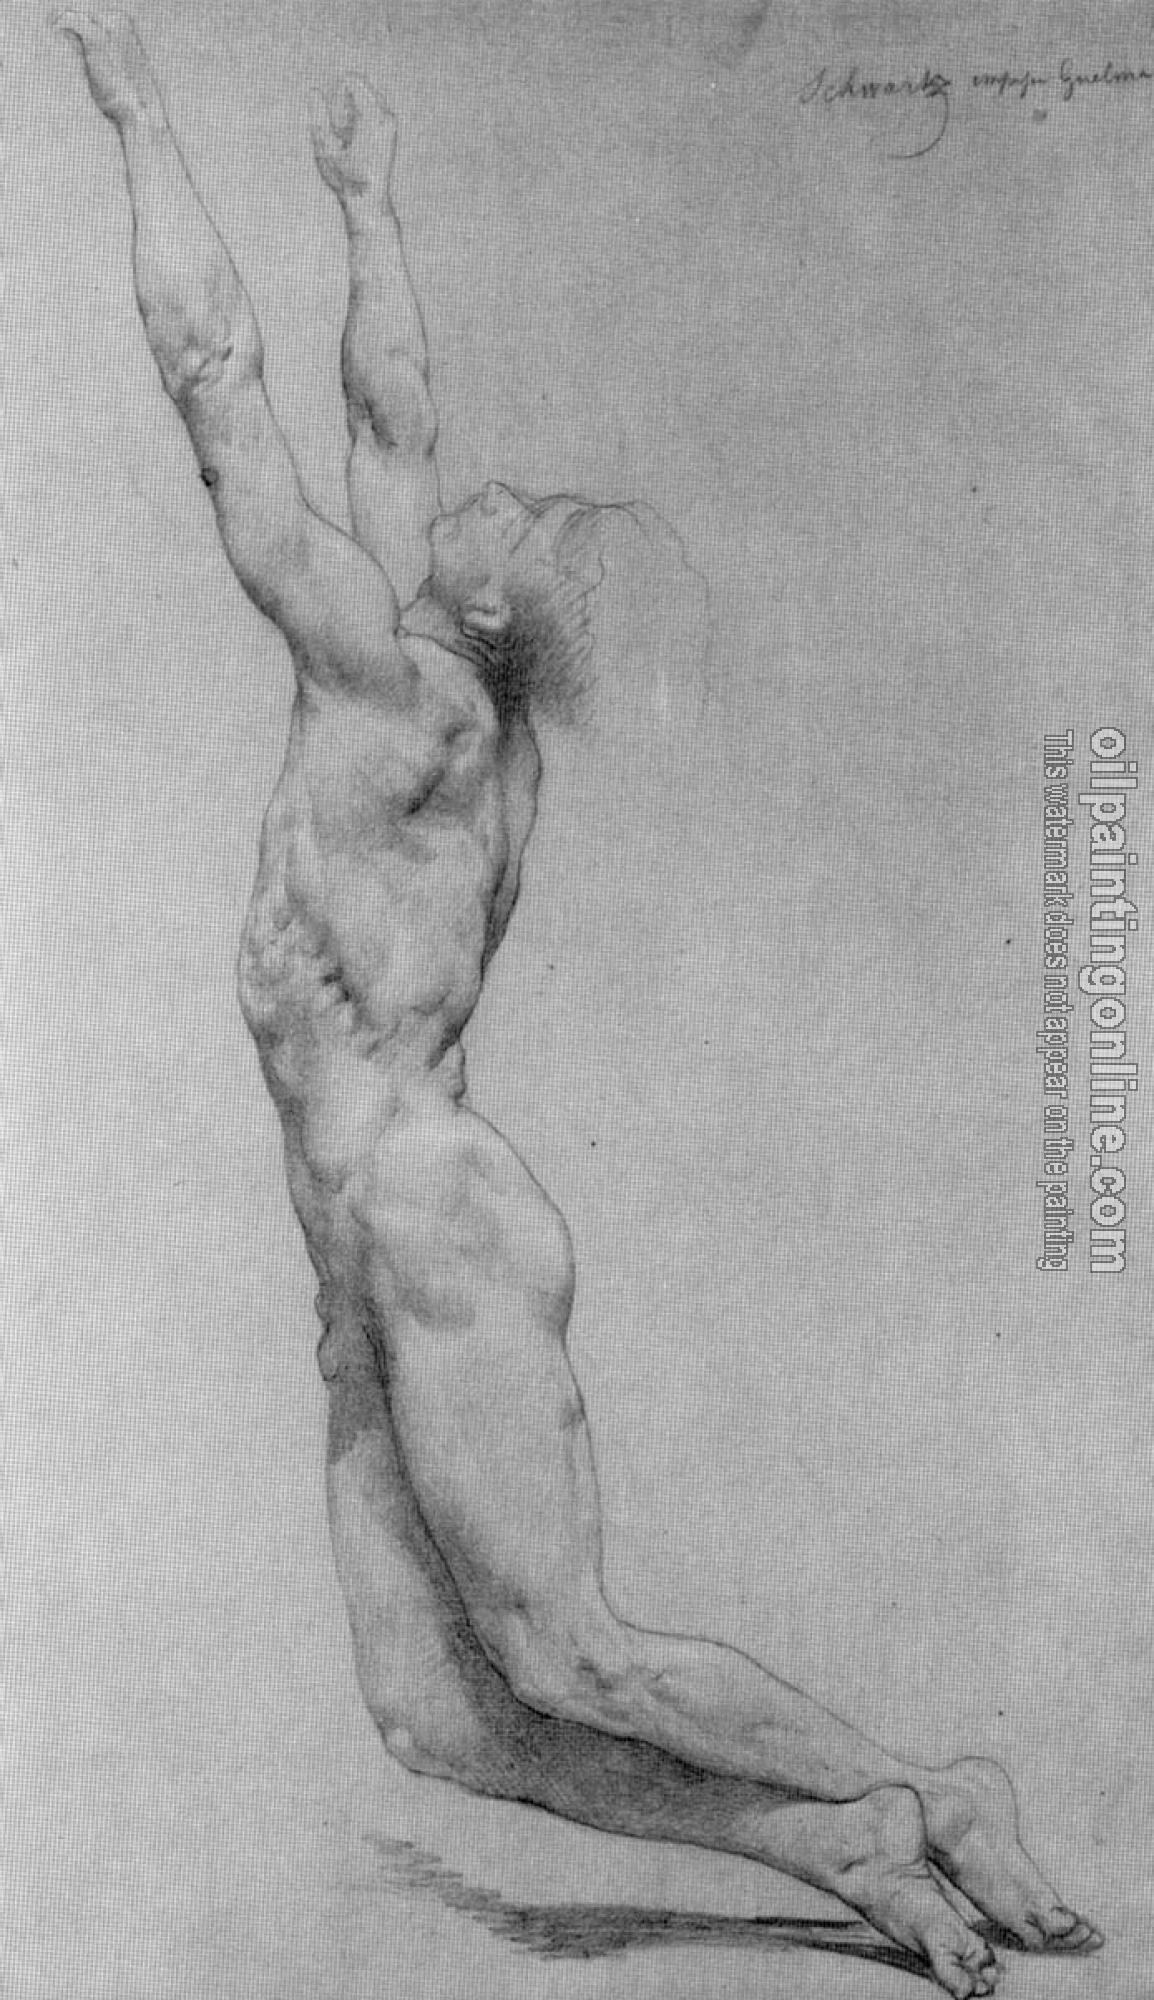 Bouguereau, William-Adolphe - Study for The Flagellation of Christ